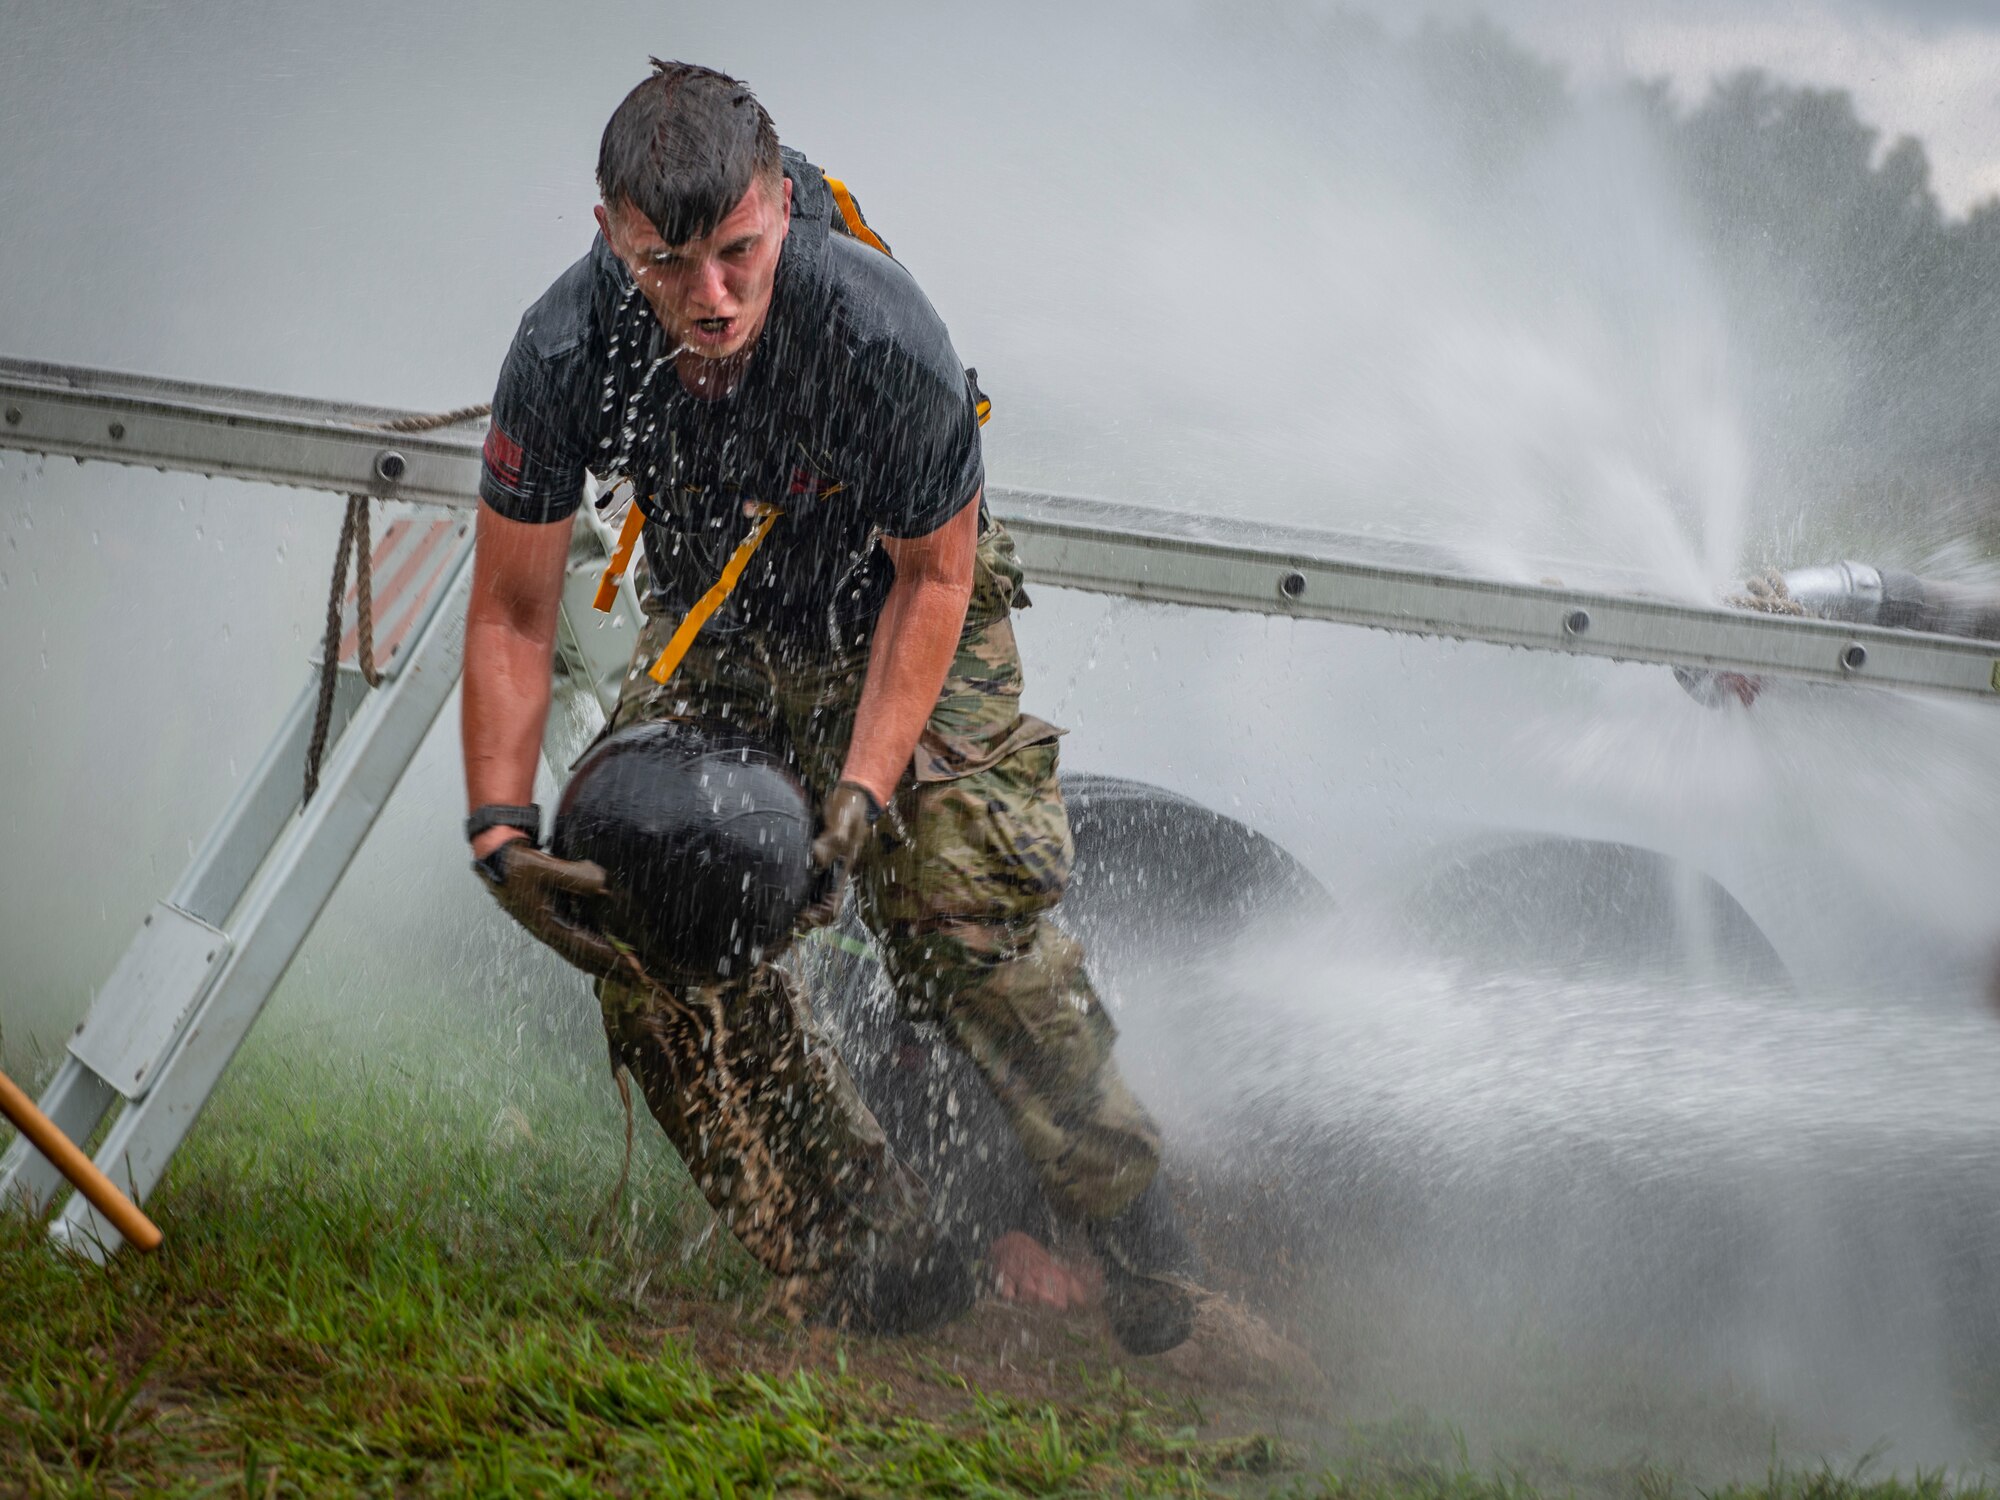 U.S. Air Force Staff Sgt. Chad Jarvis, 103rd Security Forces Squadron, carries a medicine ball through a tunnel while being sprayed with water during the physical training portion of the Connecticut SWAT Challenge in West Hartford, Connecticut, Aug. 19, 2021. The competition brings together tactical operators from across the nation to train SWAT weapons tactics, movements, and physical fitness. (U.S. Air National Guard photo by Tech. Sgt. Steven Tucker)